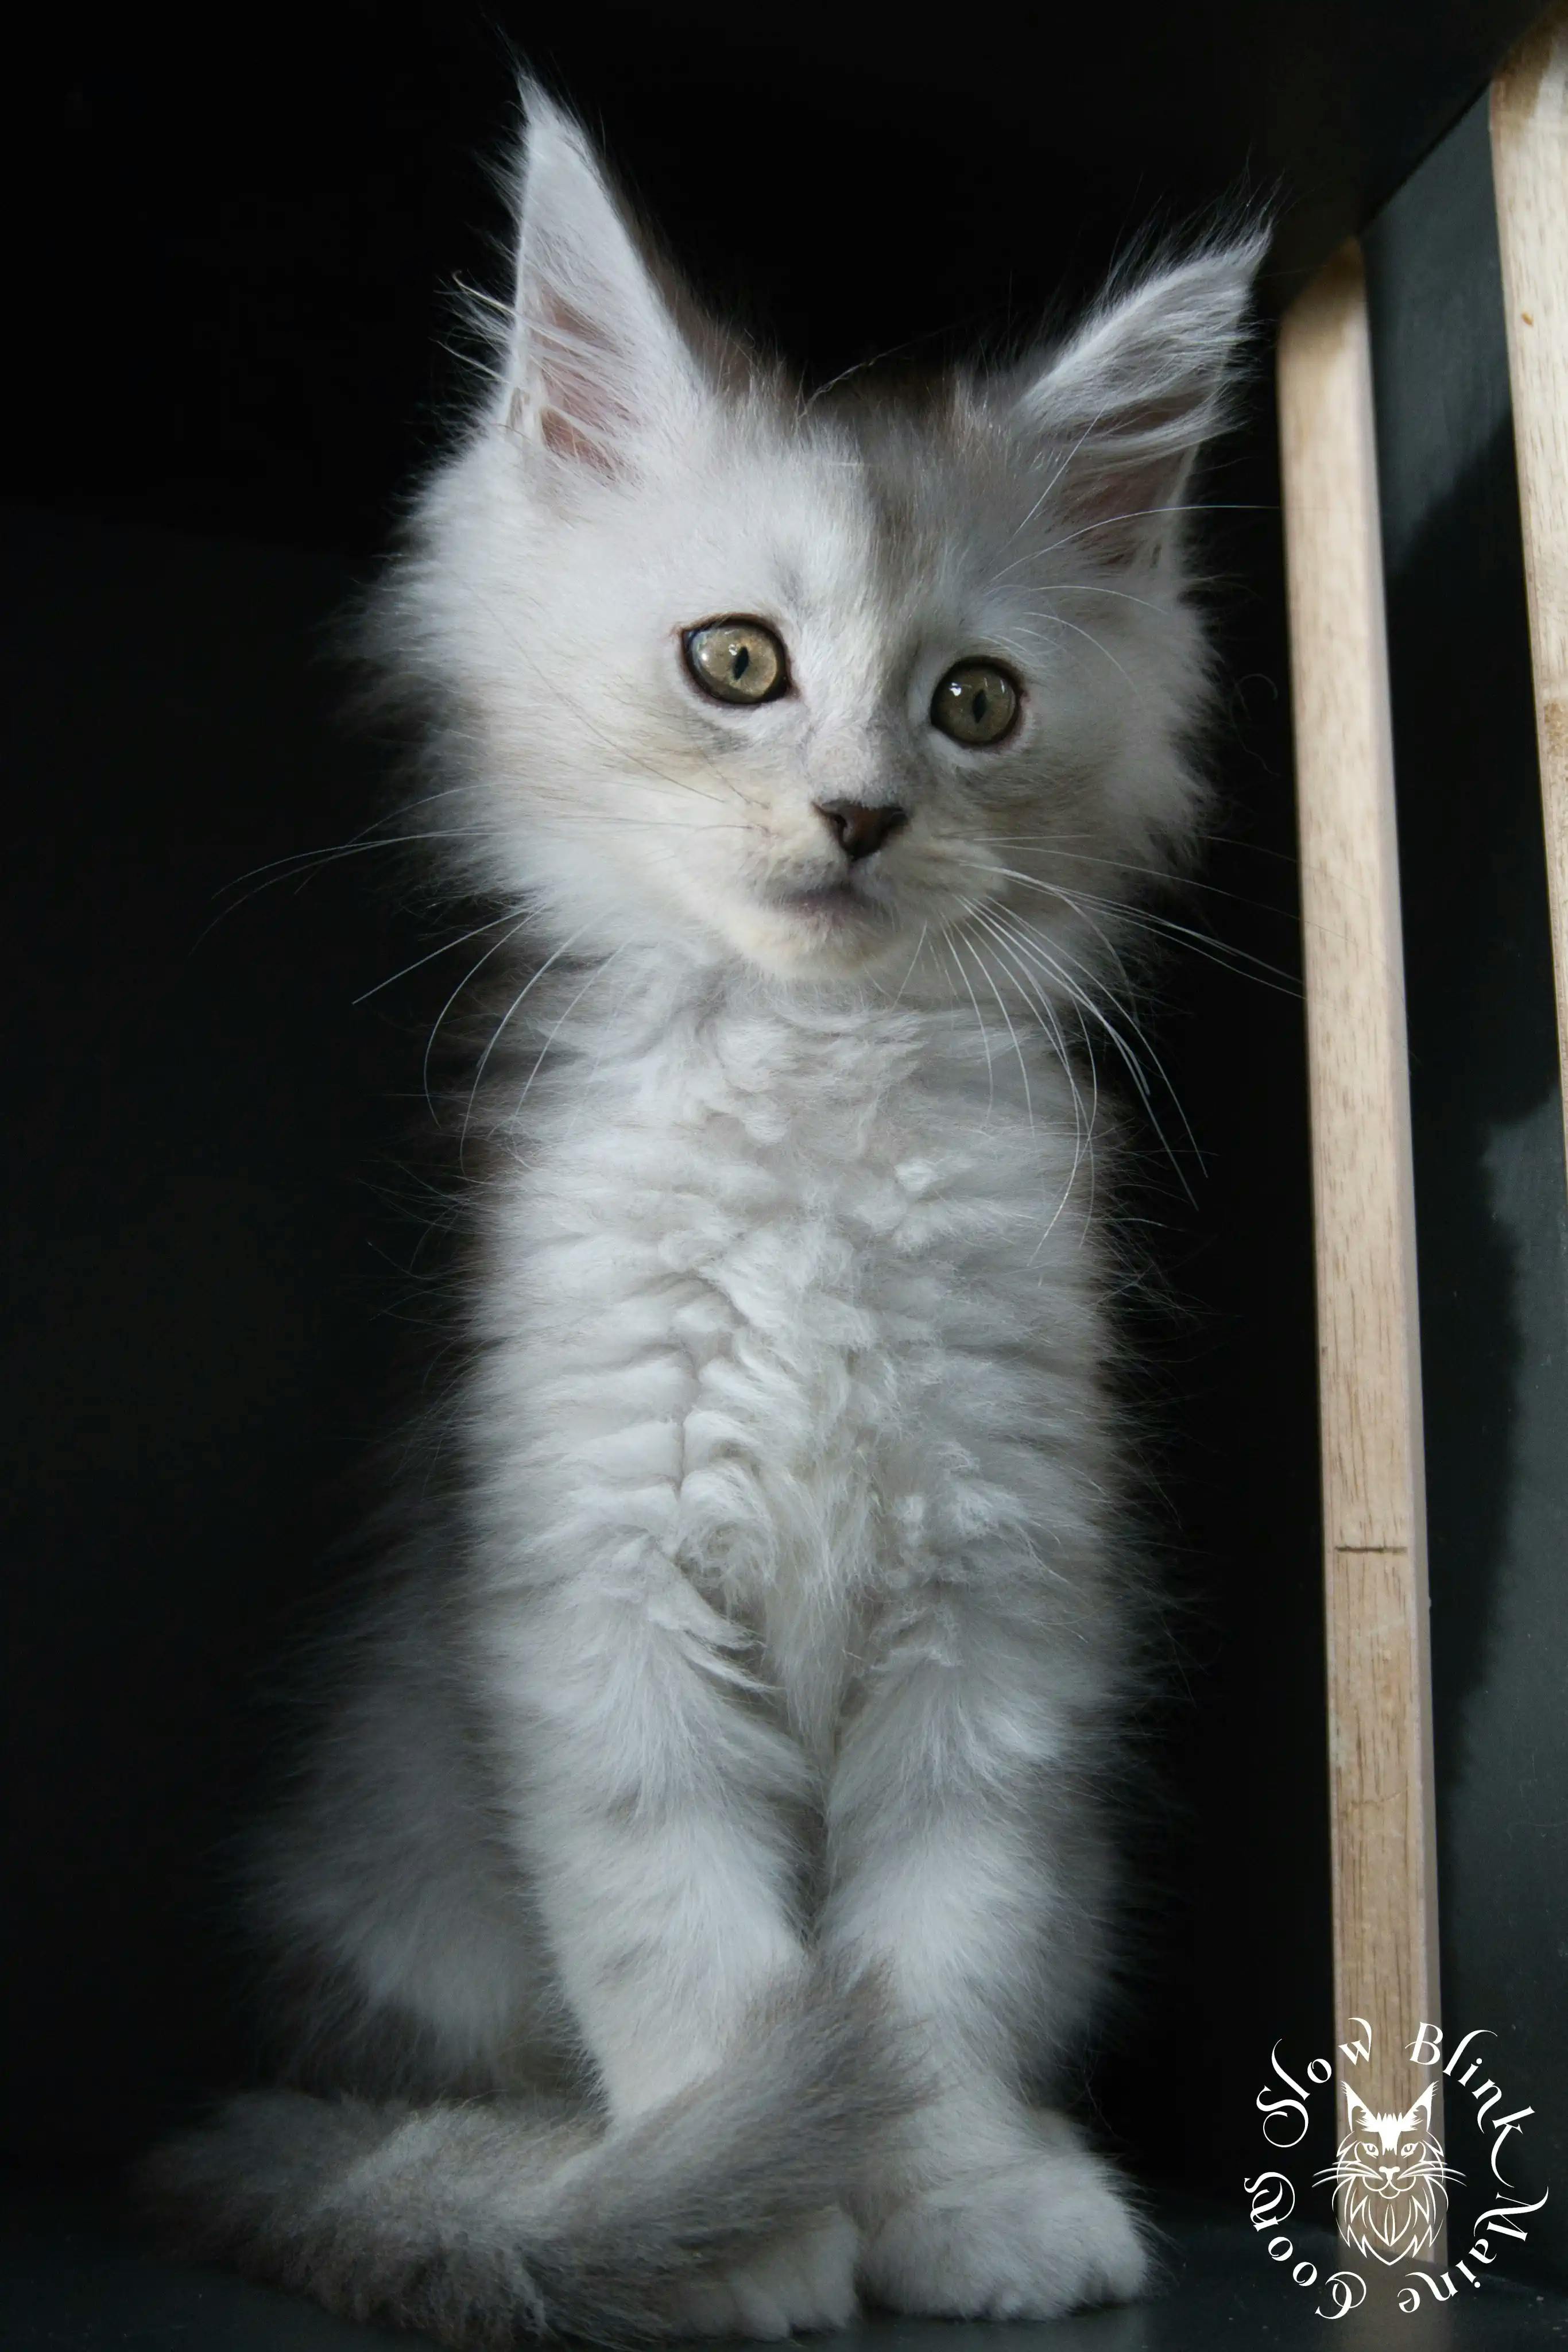 High Silver Maine Coon Kittens > black silver tabby maine coon kitten | ems code ns 22 23 24 25 | slowblinkmainecoons | 518